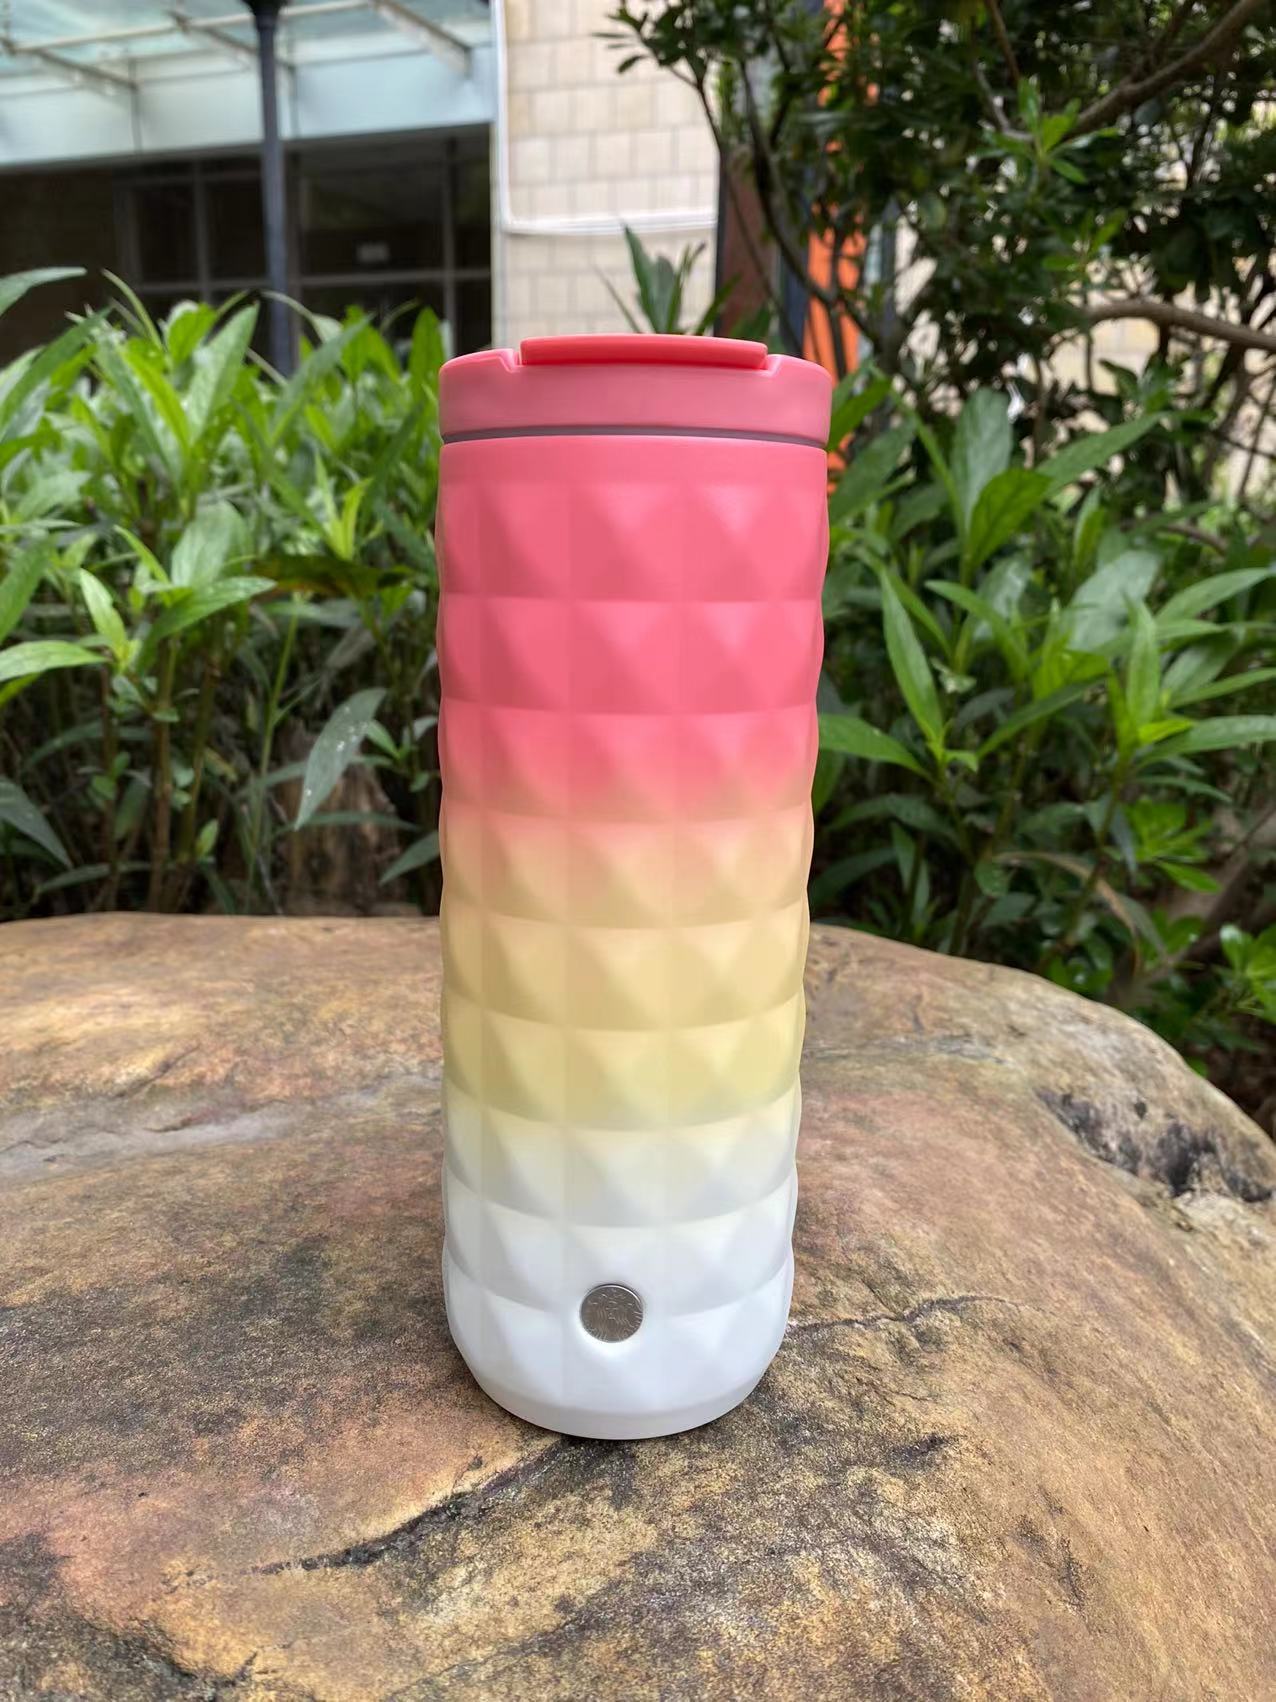 2022 China Sun Gradient Pink Yellow Stainless Steel 16oz Cup